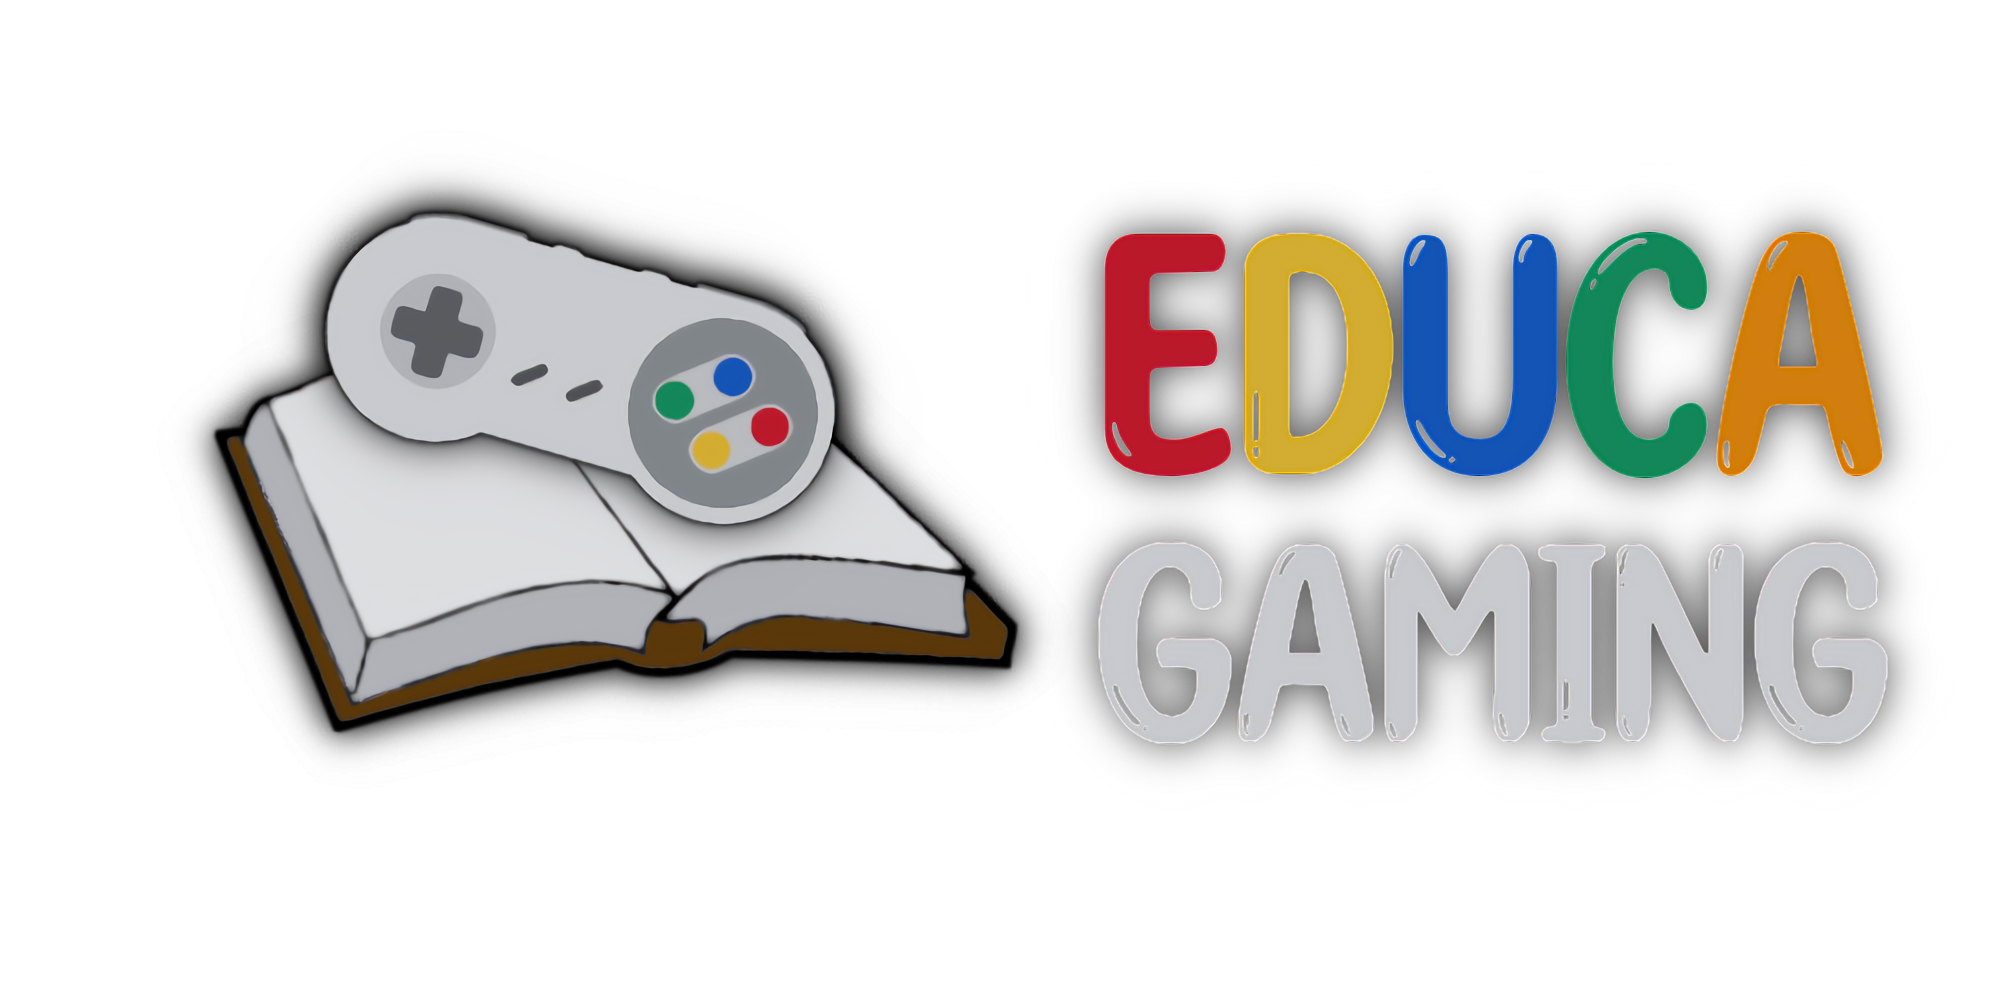 About Educagaming.com | Educational Games